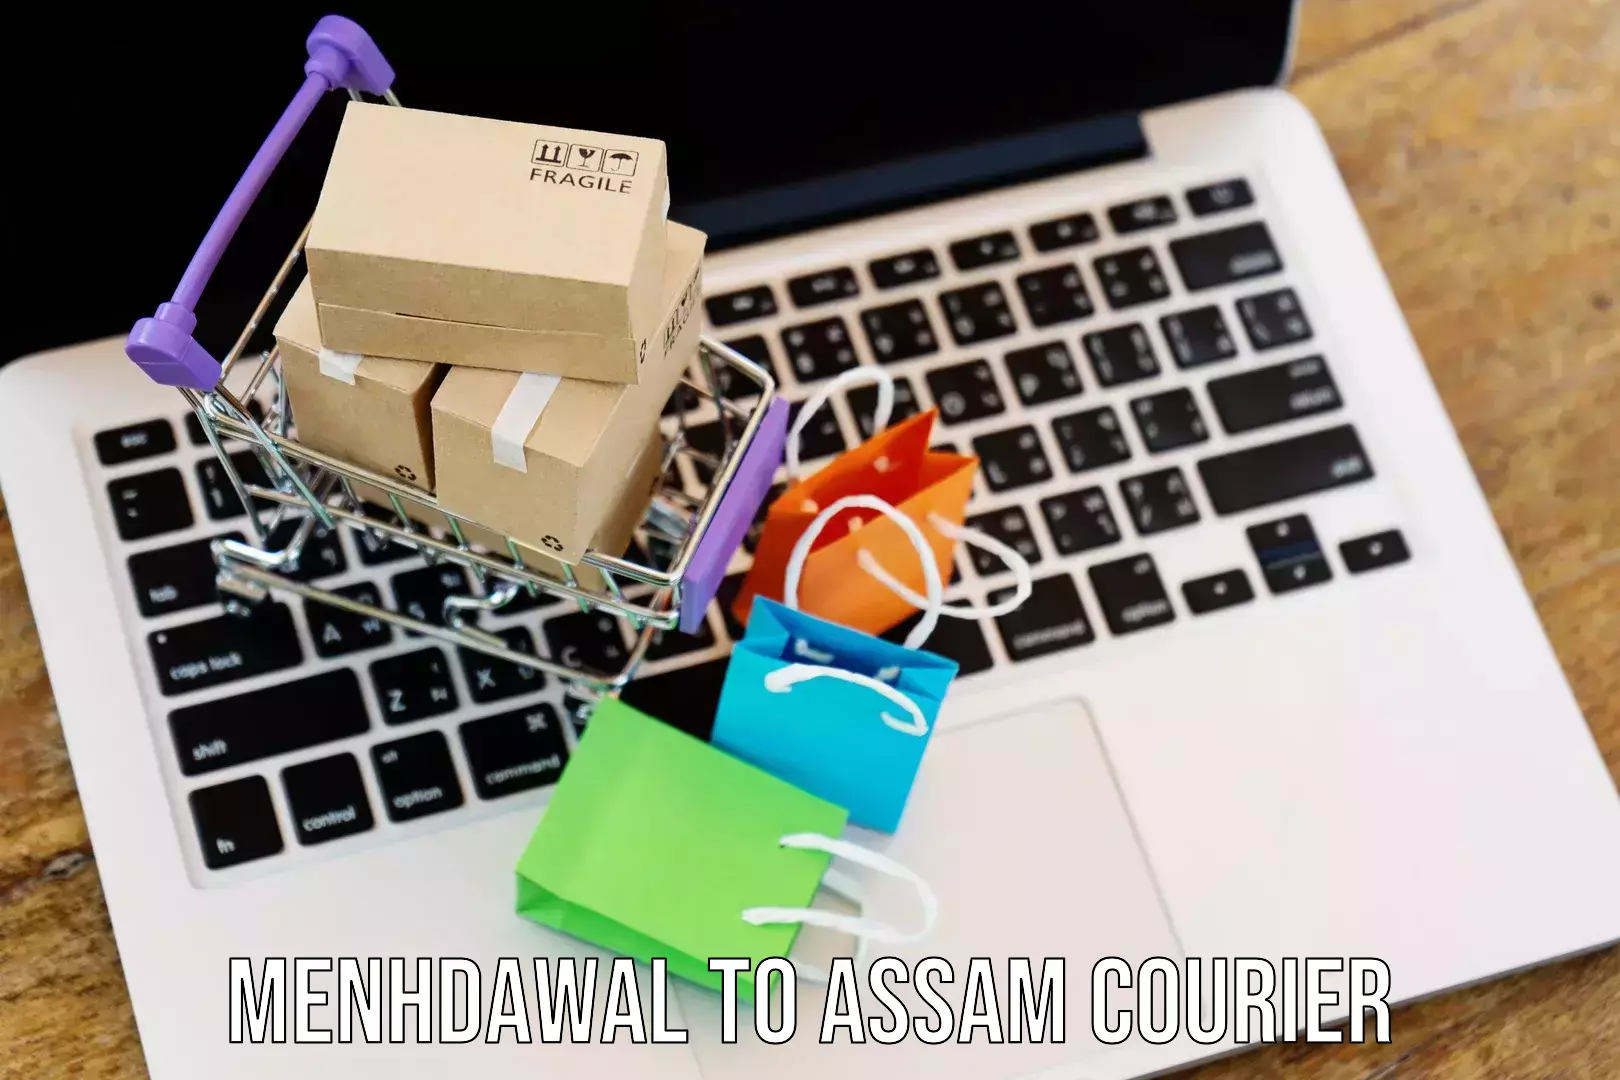 Courier service efficiency Menhdawal to Assam